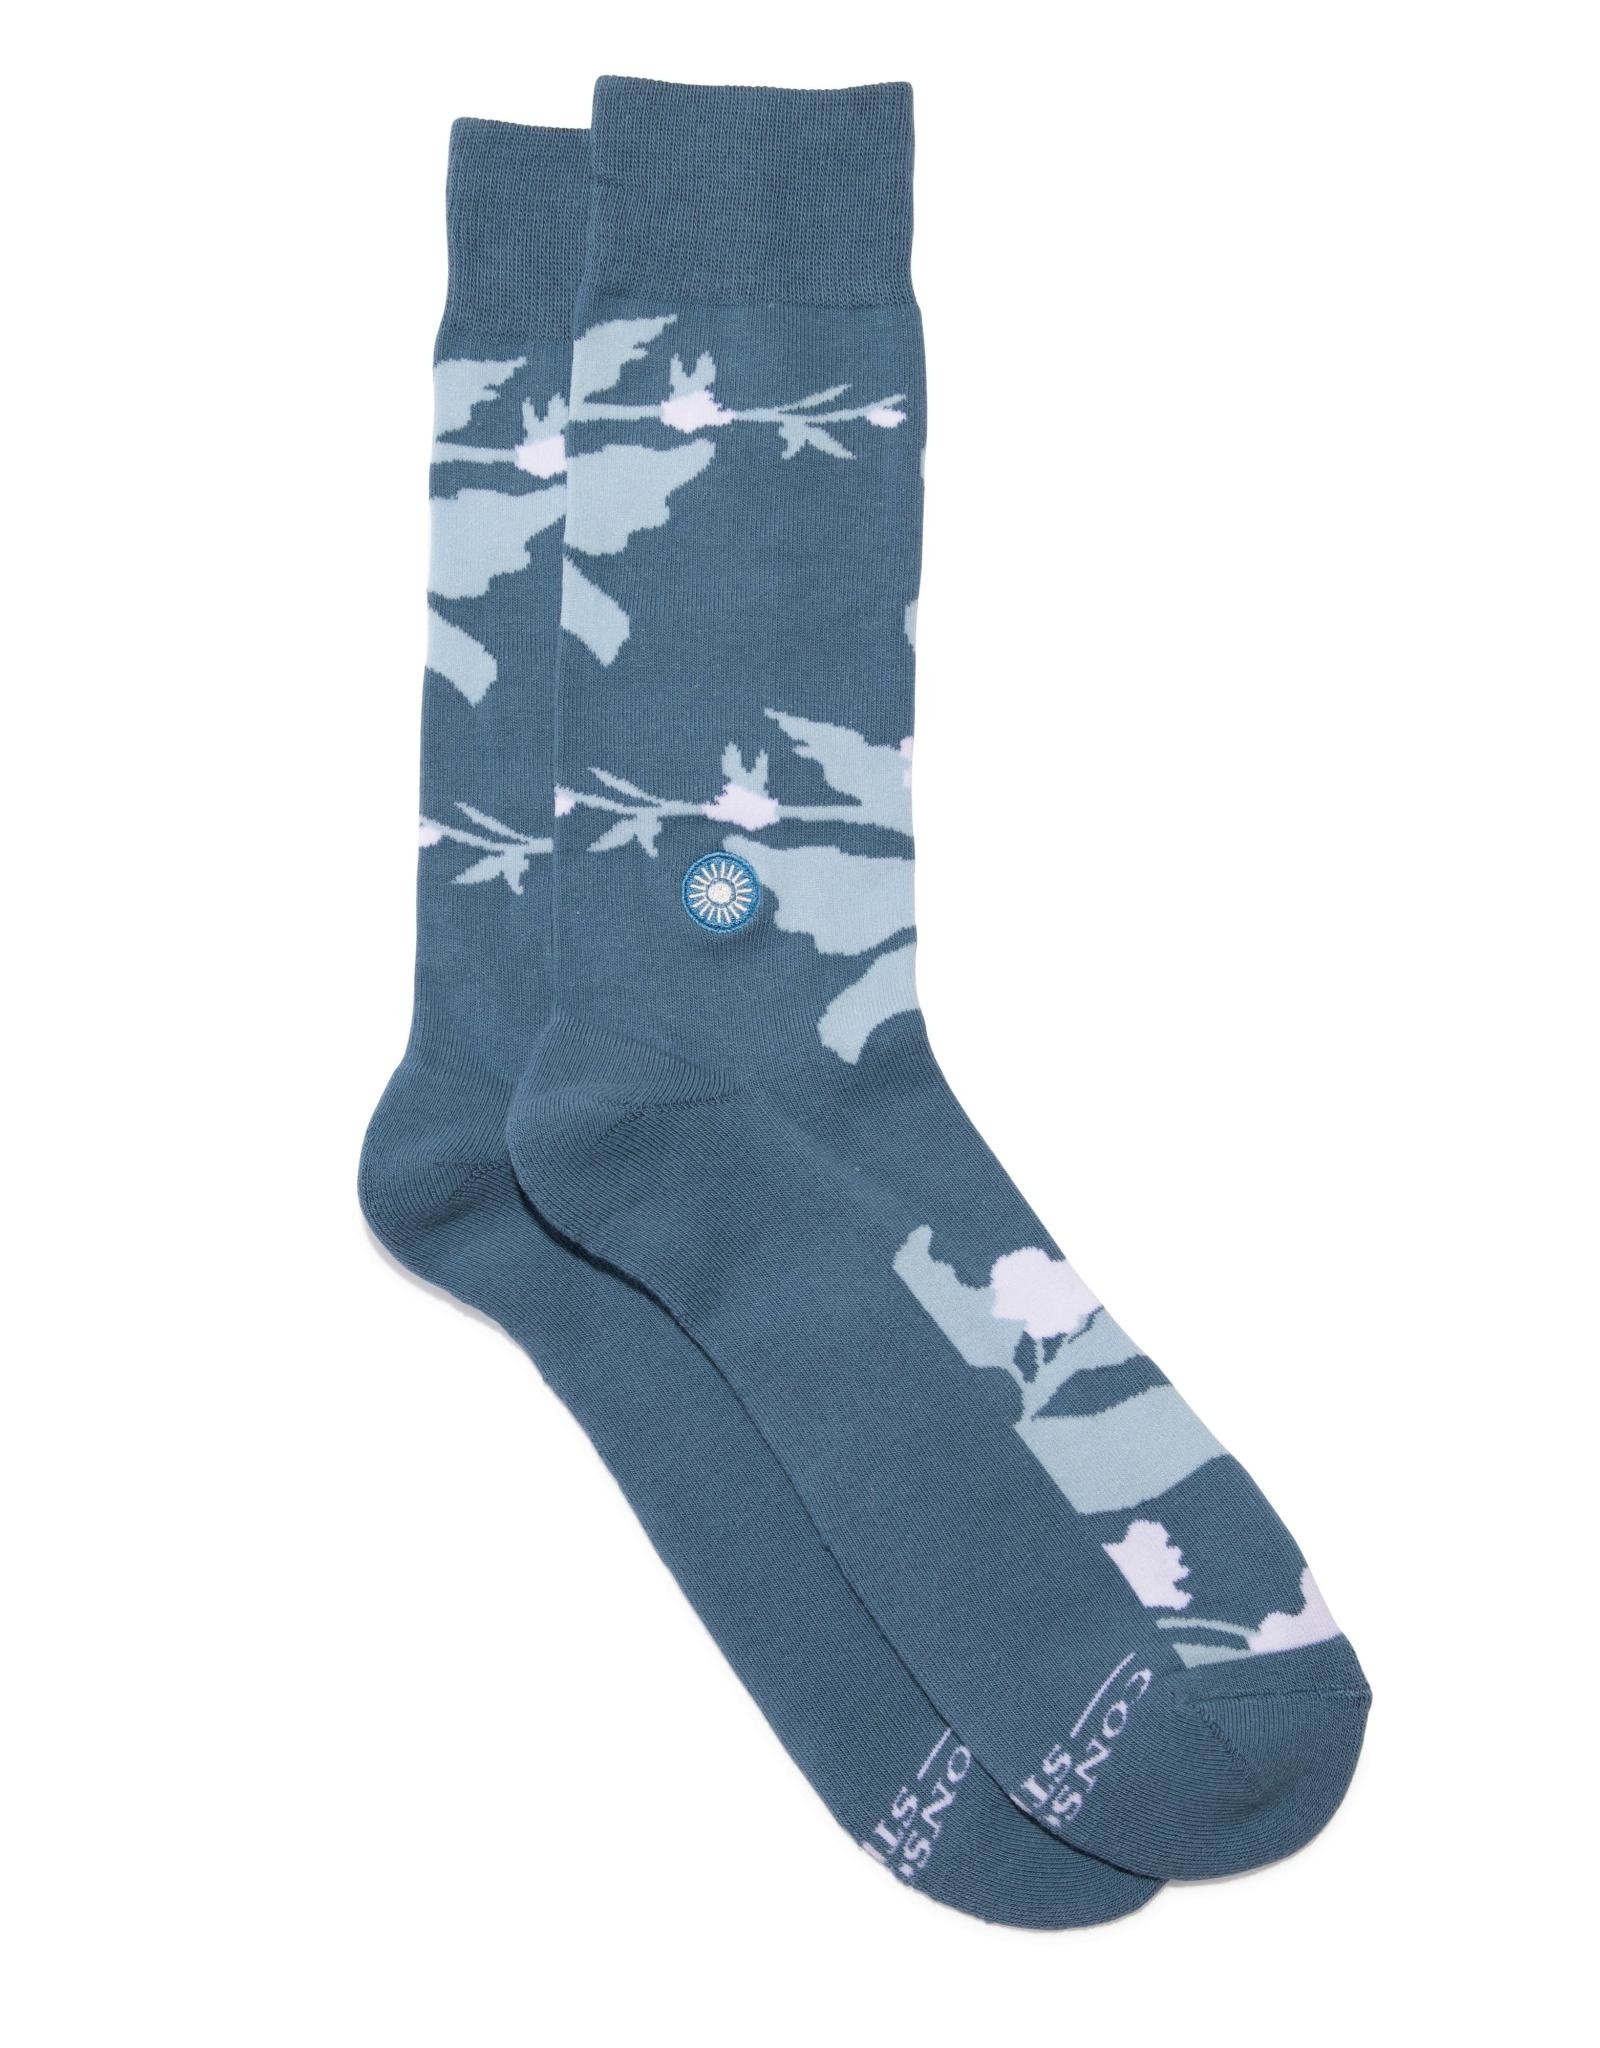 Conscious Step Socks that Support Mental Health (Foliage)